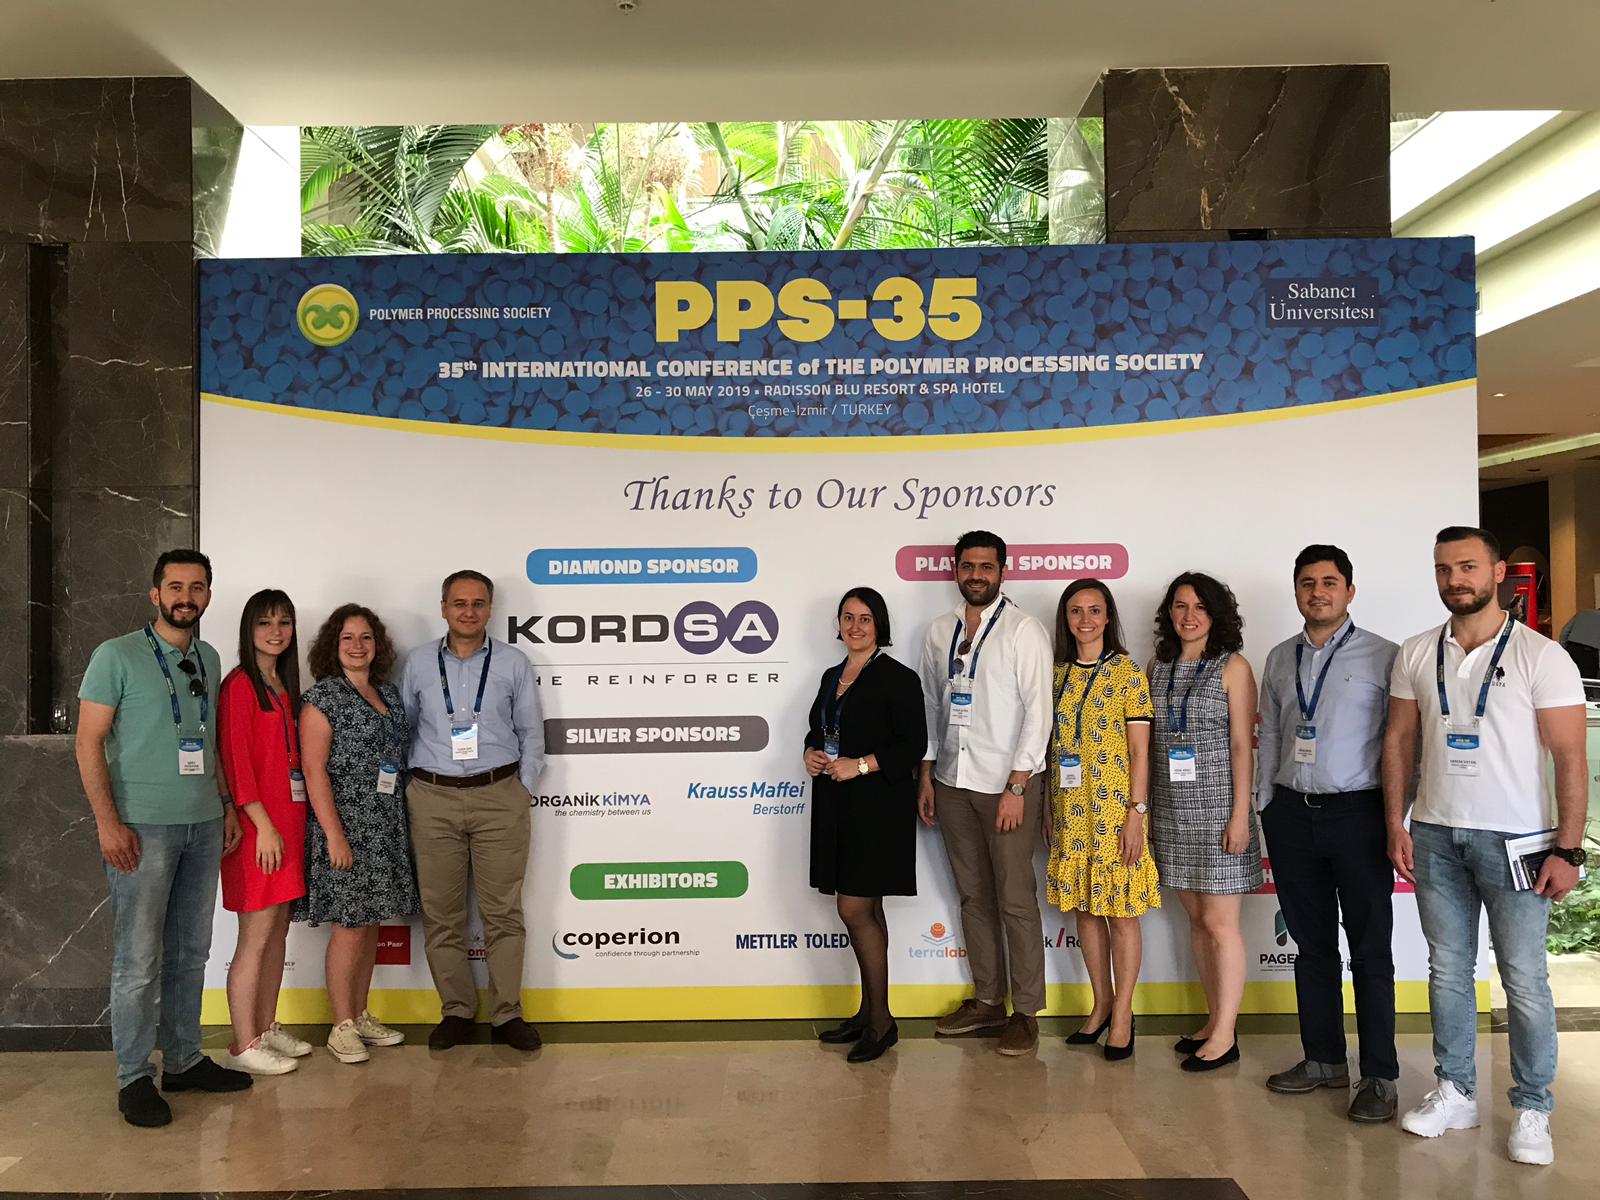 Kordsa at the International Conference of the Polymer Processing Society